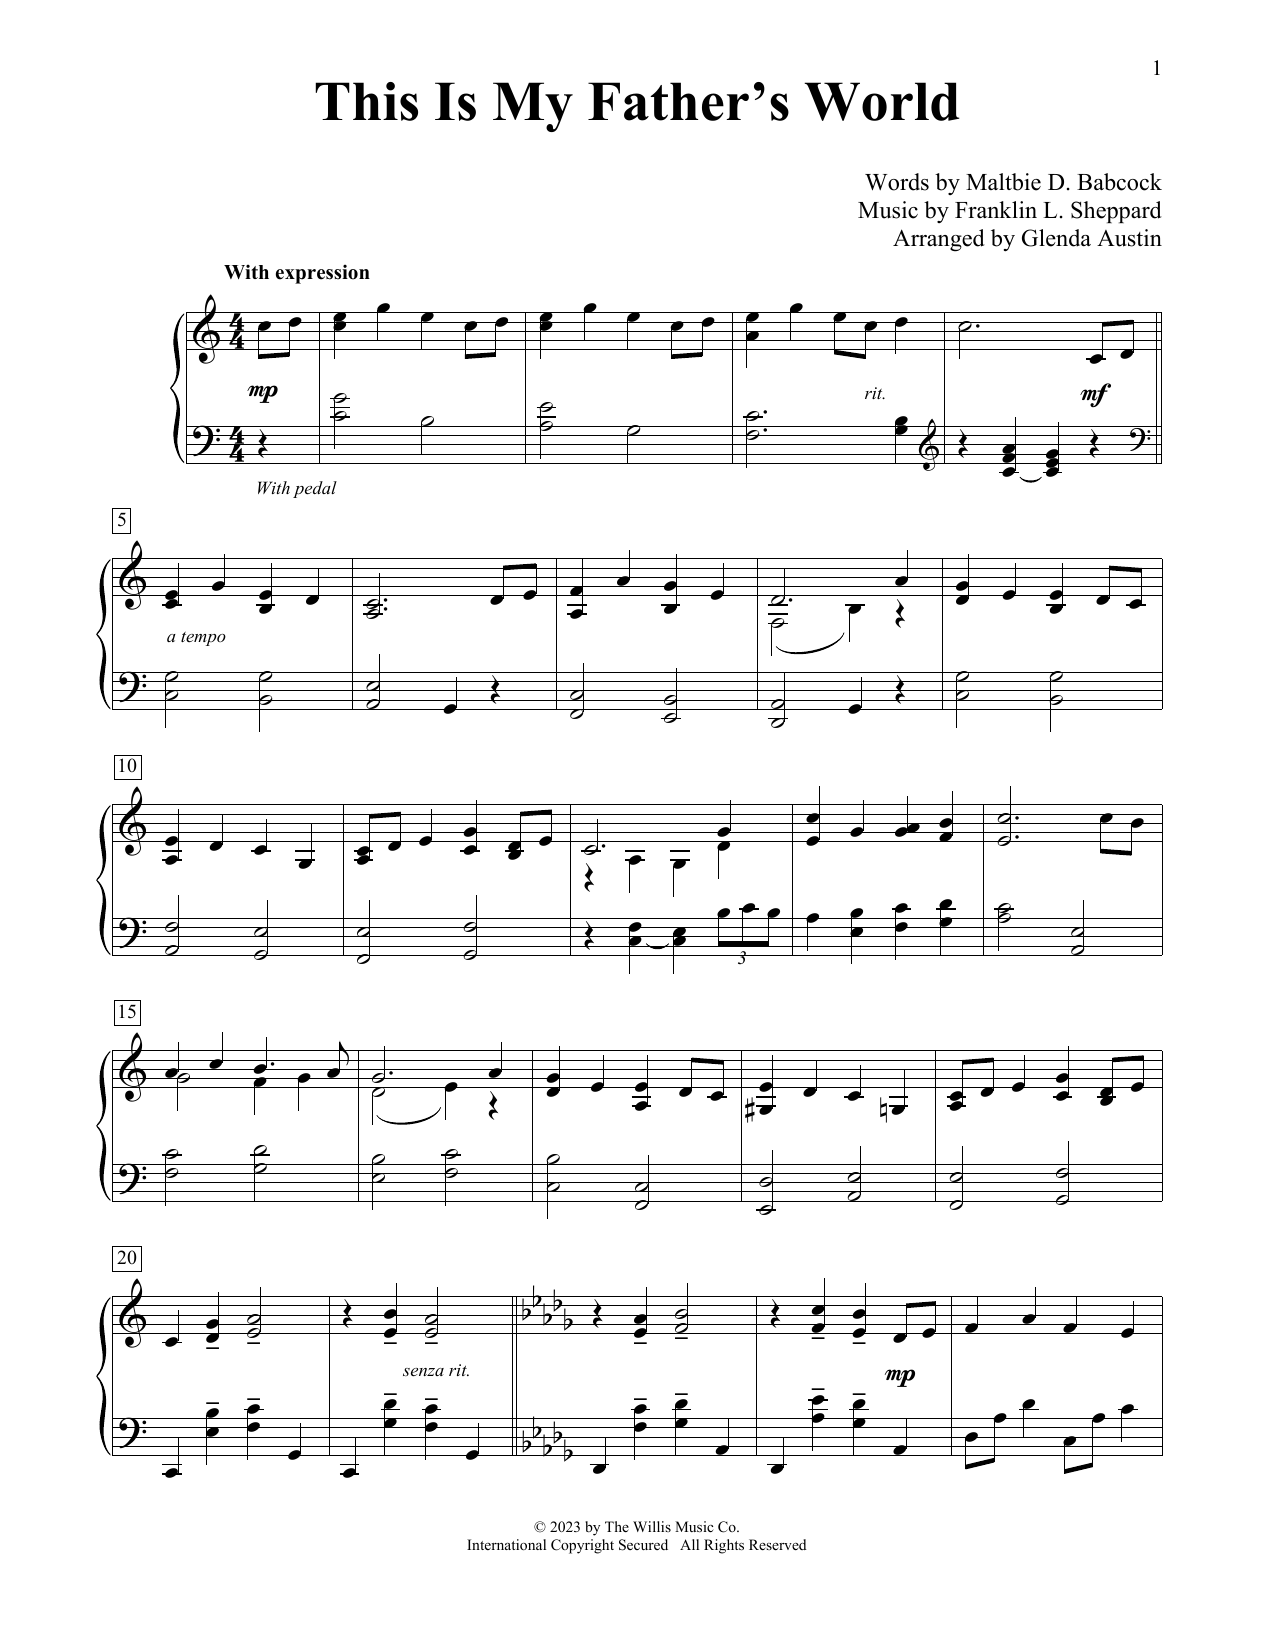 This Is My Father's World (arr. Glenda Austin) (Educational Piano) von Maltbie D. Babcock